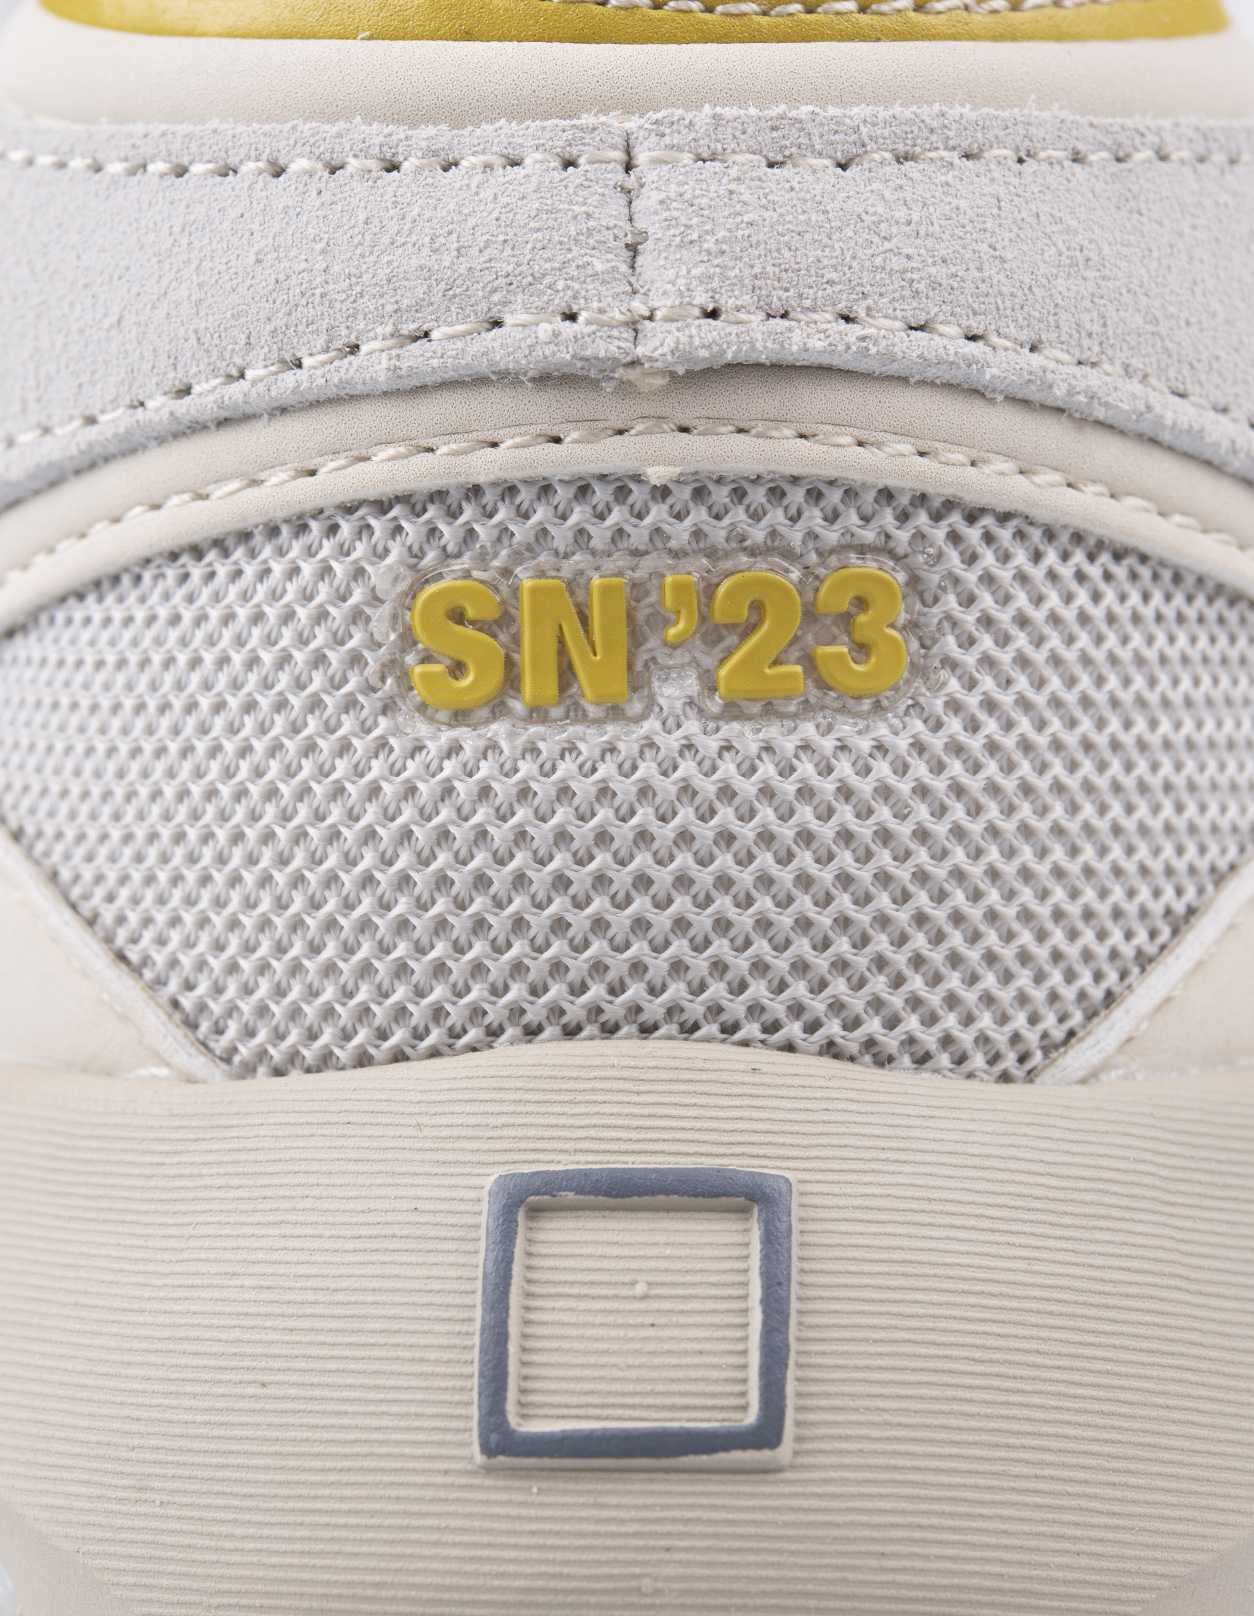 Sneakers SN'23 Collection Light Grey D.A.T.E. | M391-SN-CLLG